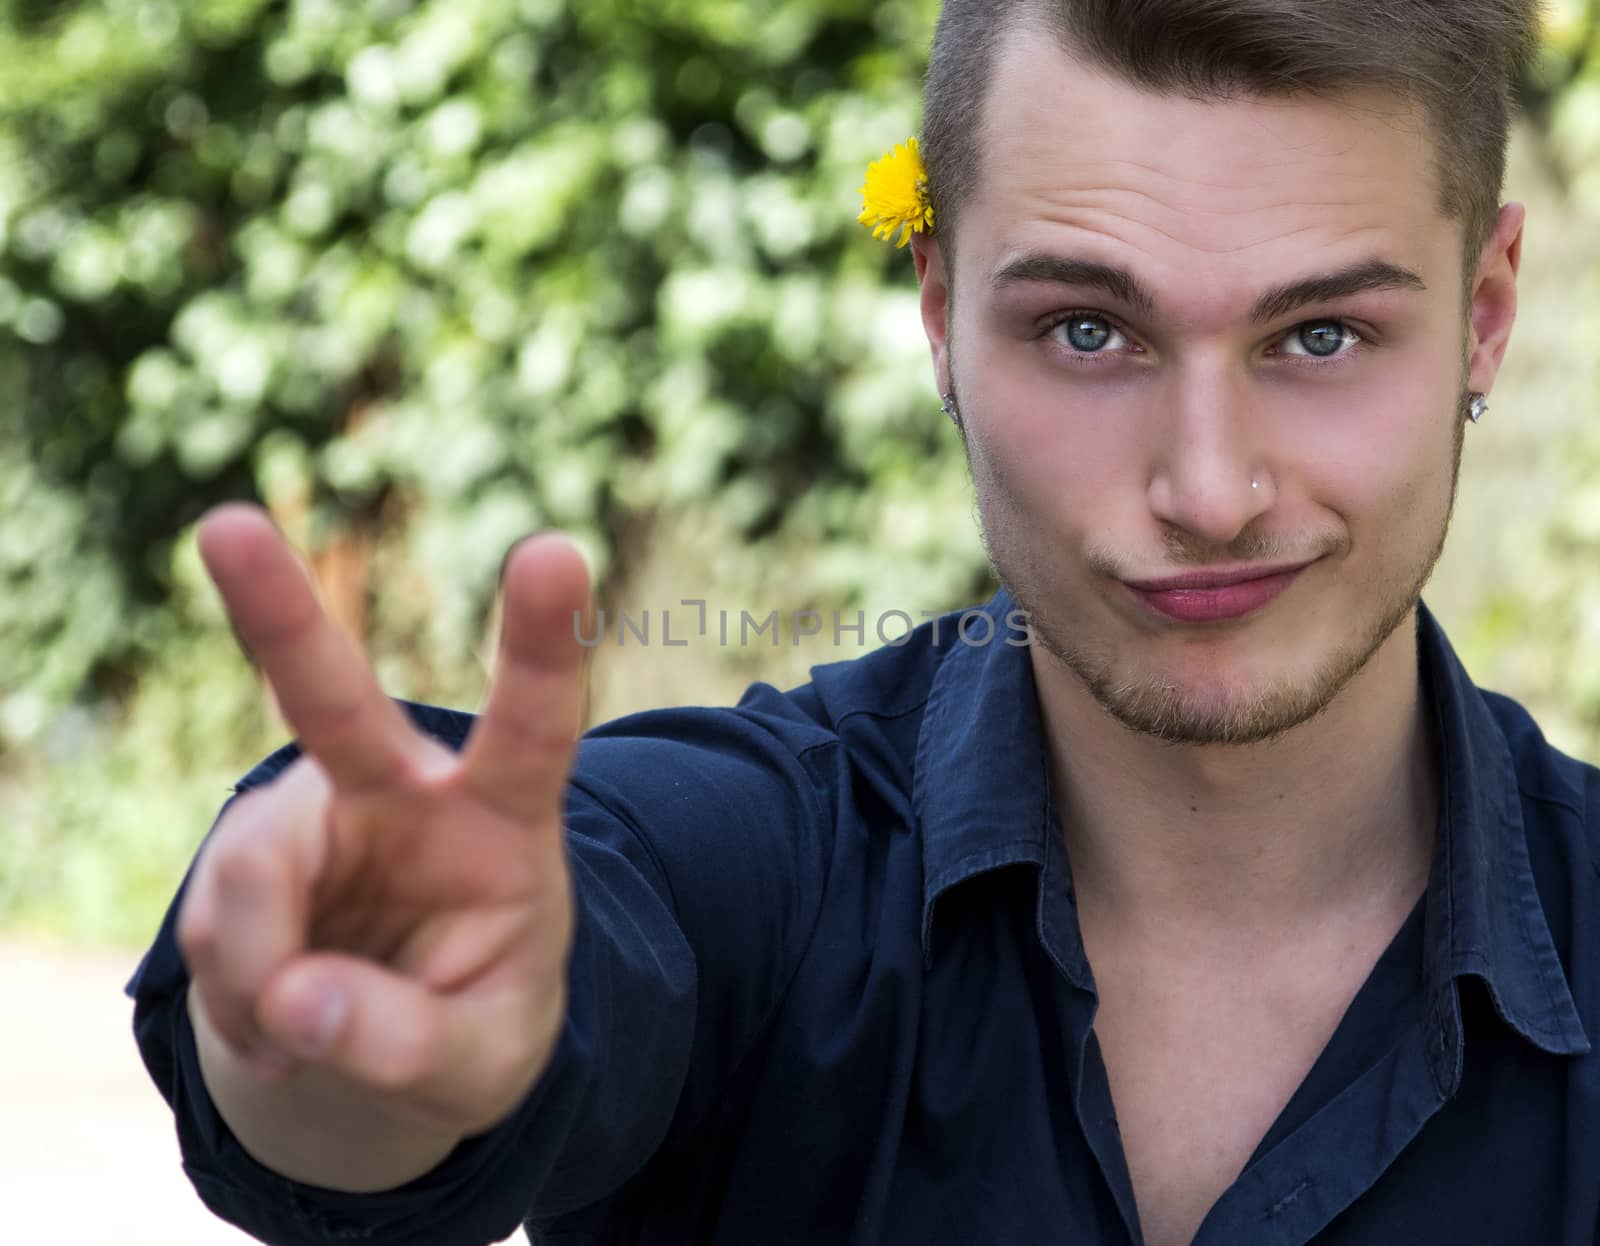 Attractive young blond man doing peace sign by artofphoto